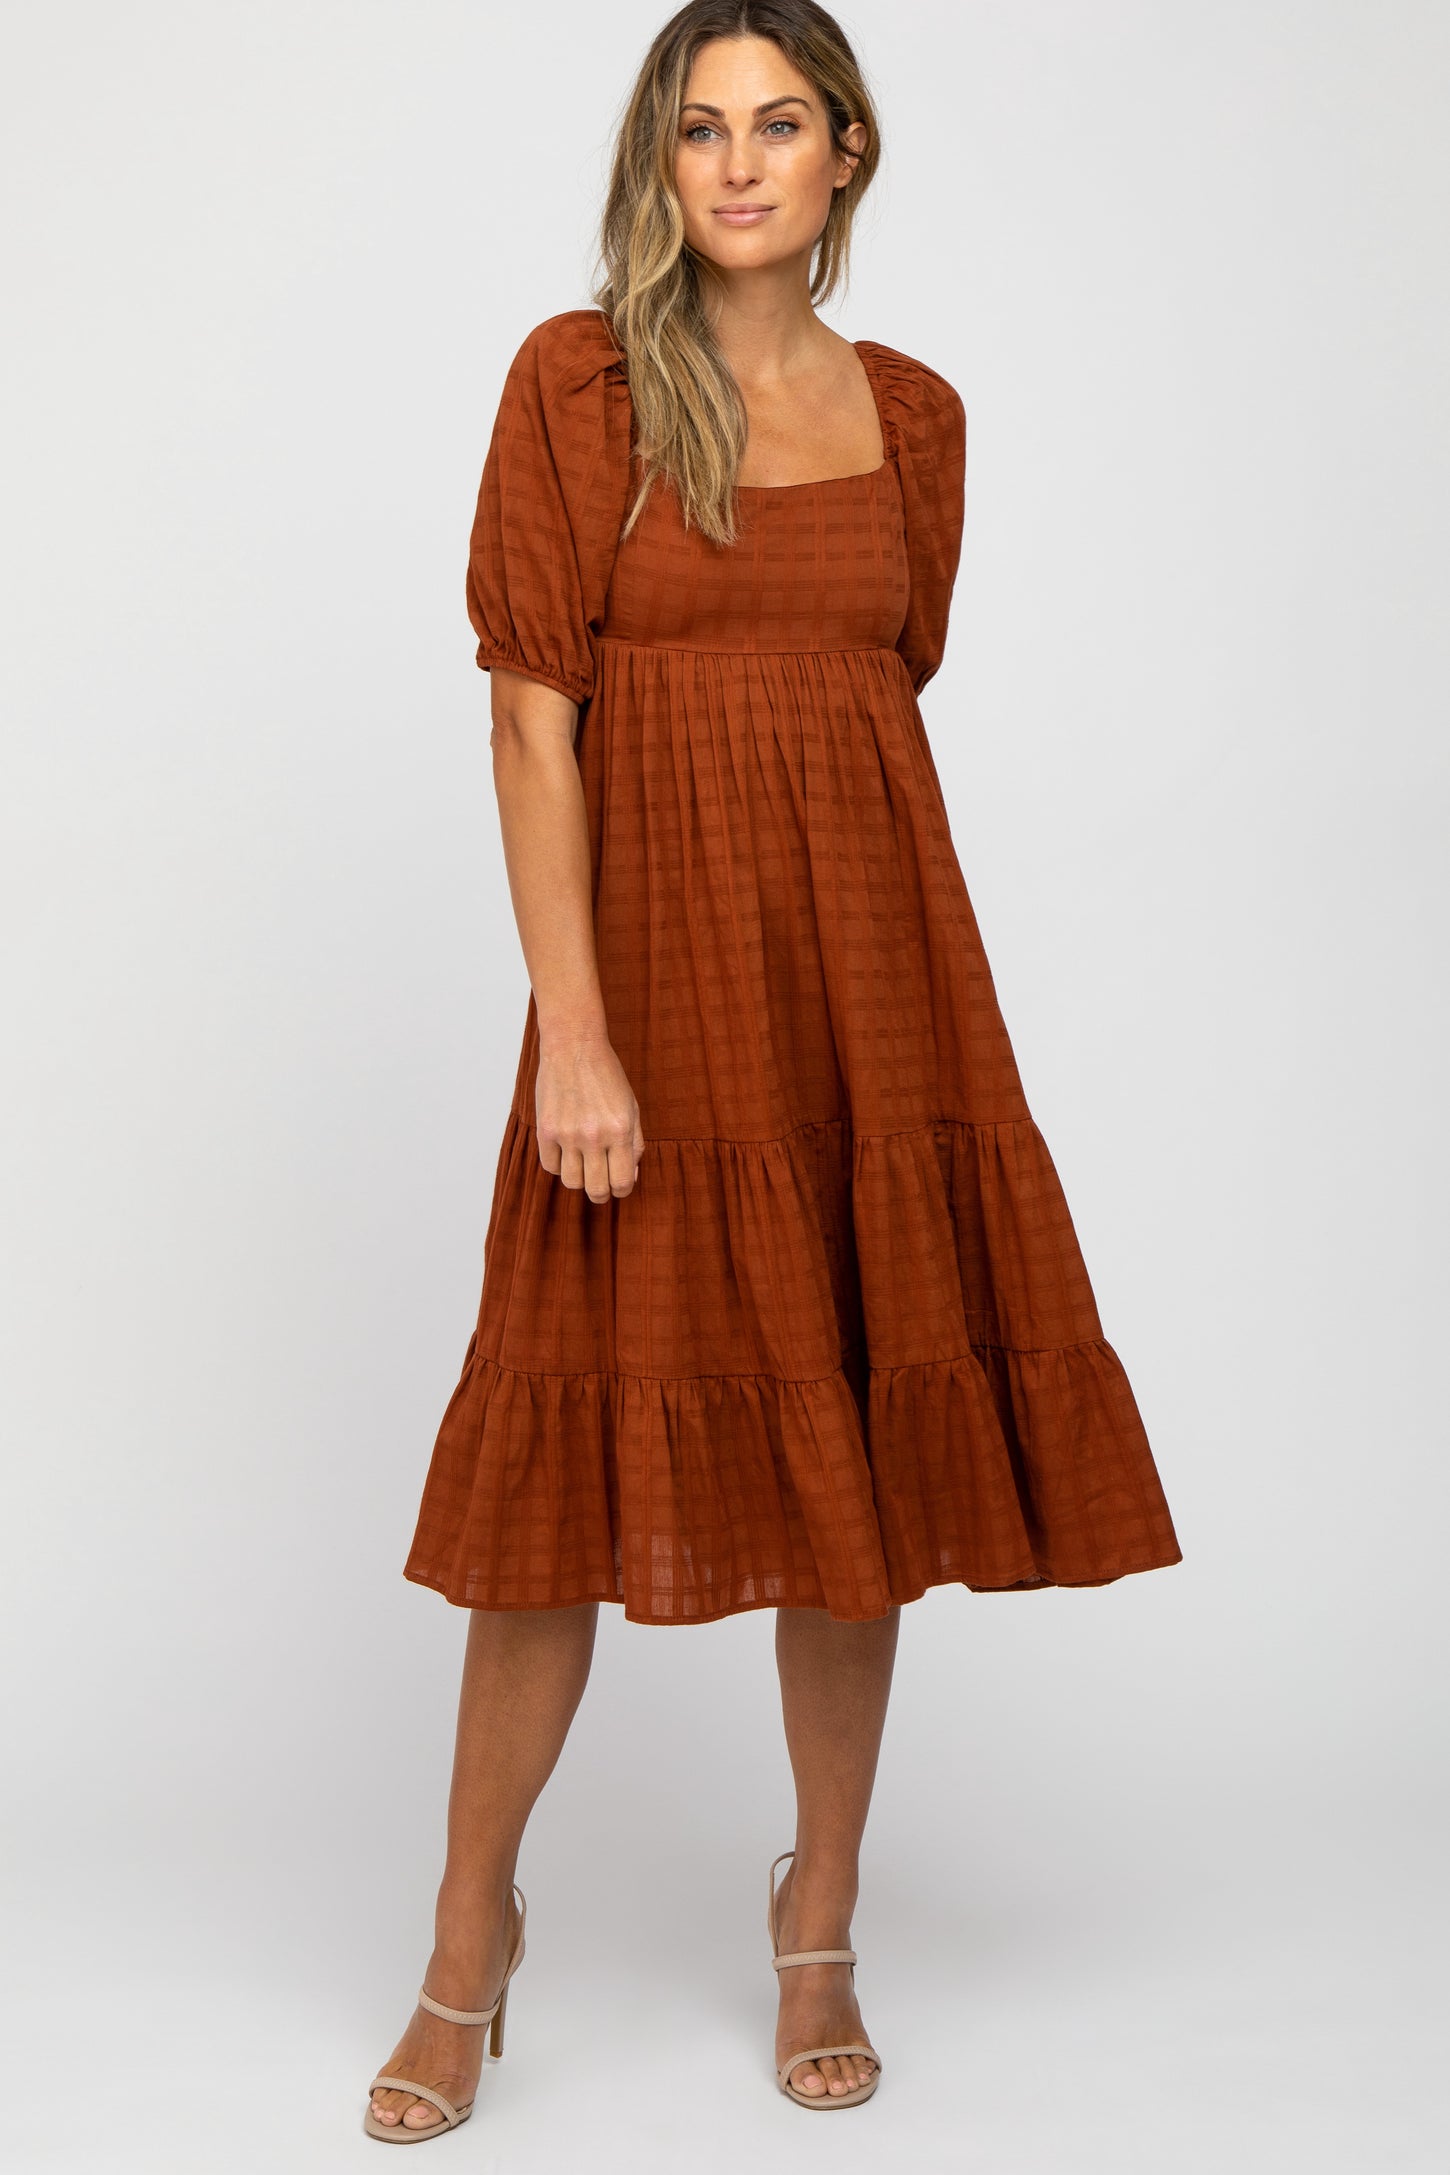 Tiered T-Shirt Dress - Kelly in the City